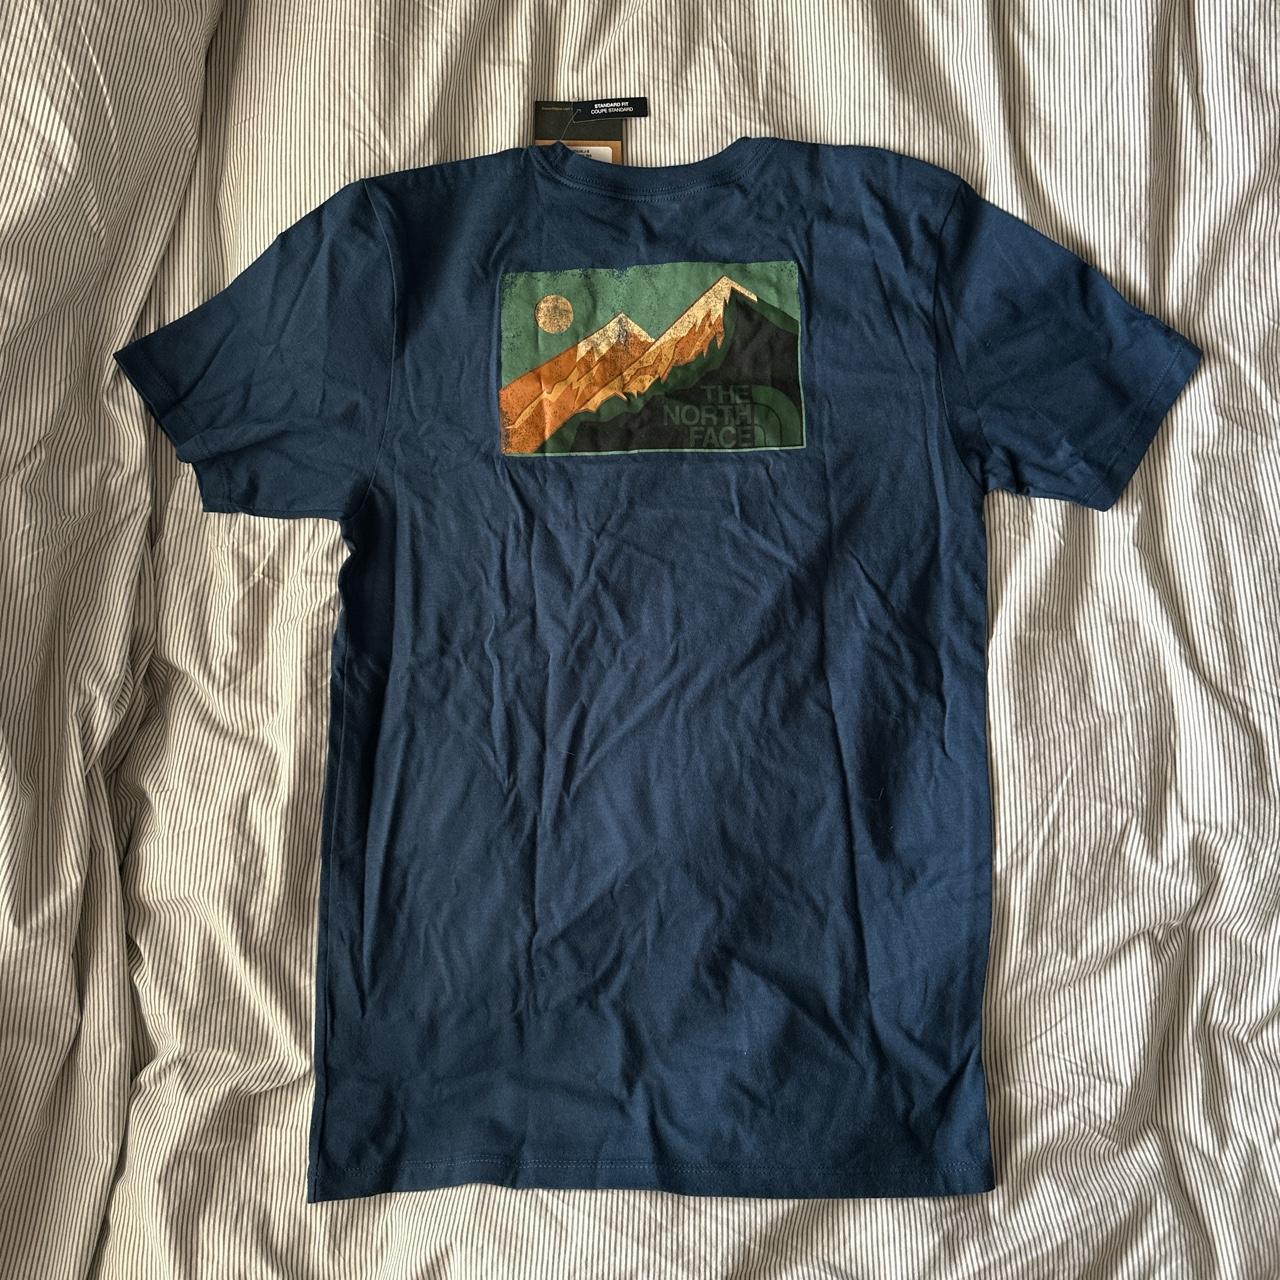 The North Face Men's Navy T-shirt (2)